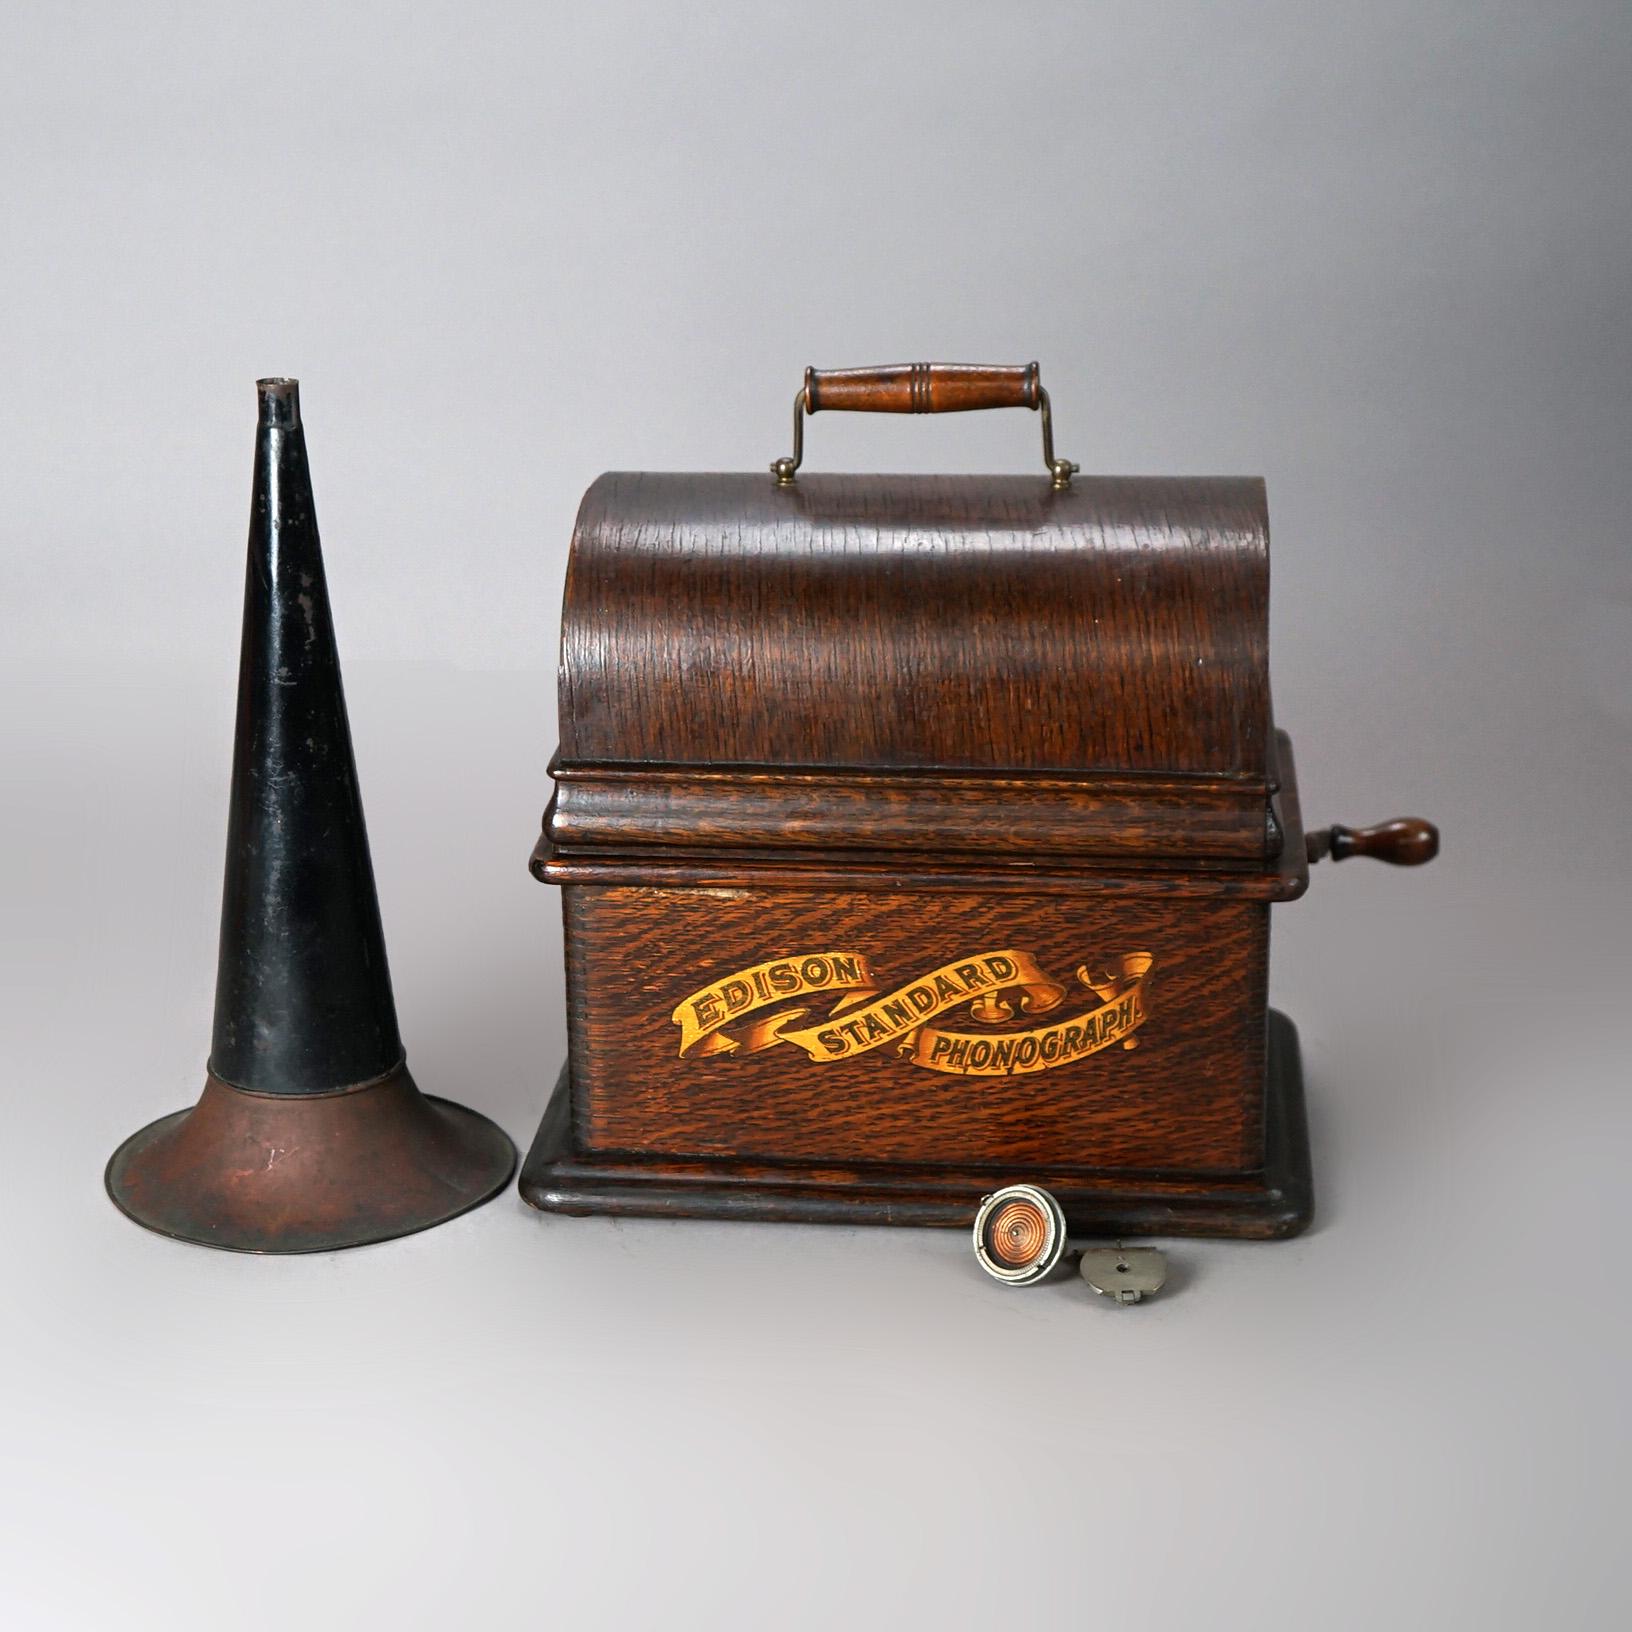 An antique Edison Standard Cylinder Phonograph offers oak case with original maker label as photographed and exterior horn, working condition, c1905

Measures - 21.75